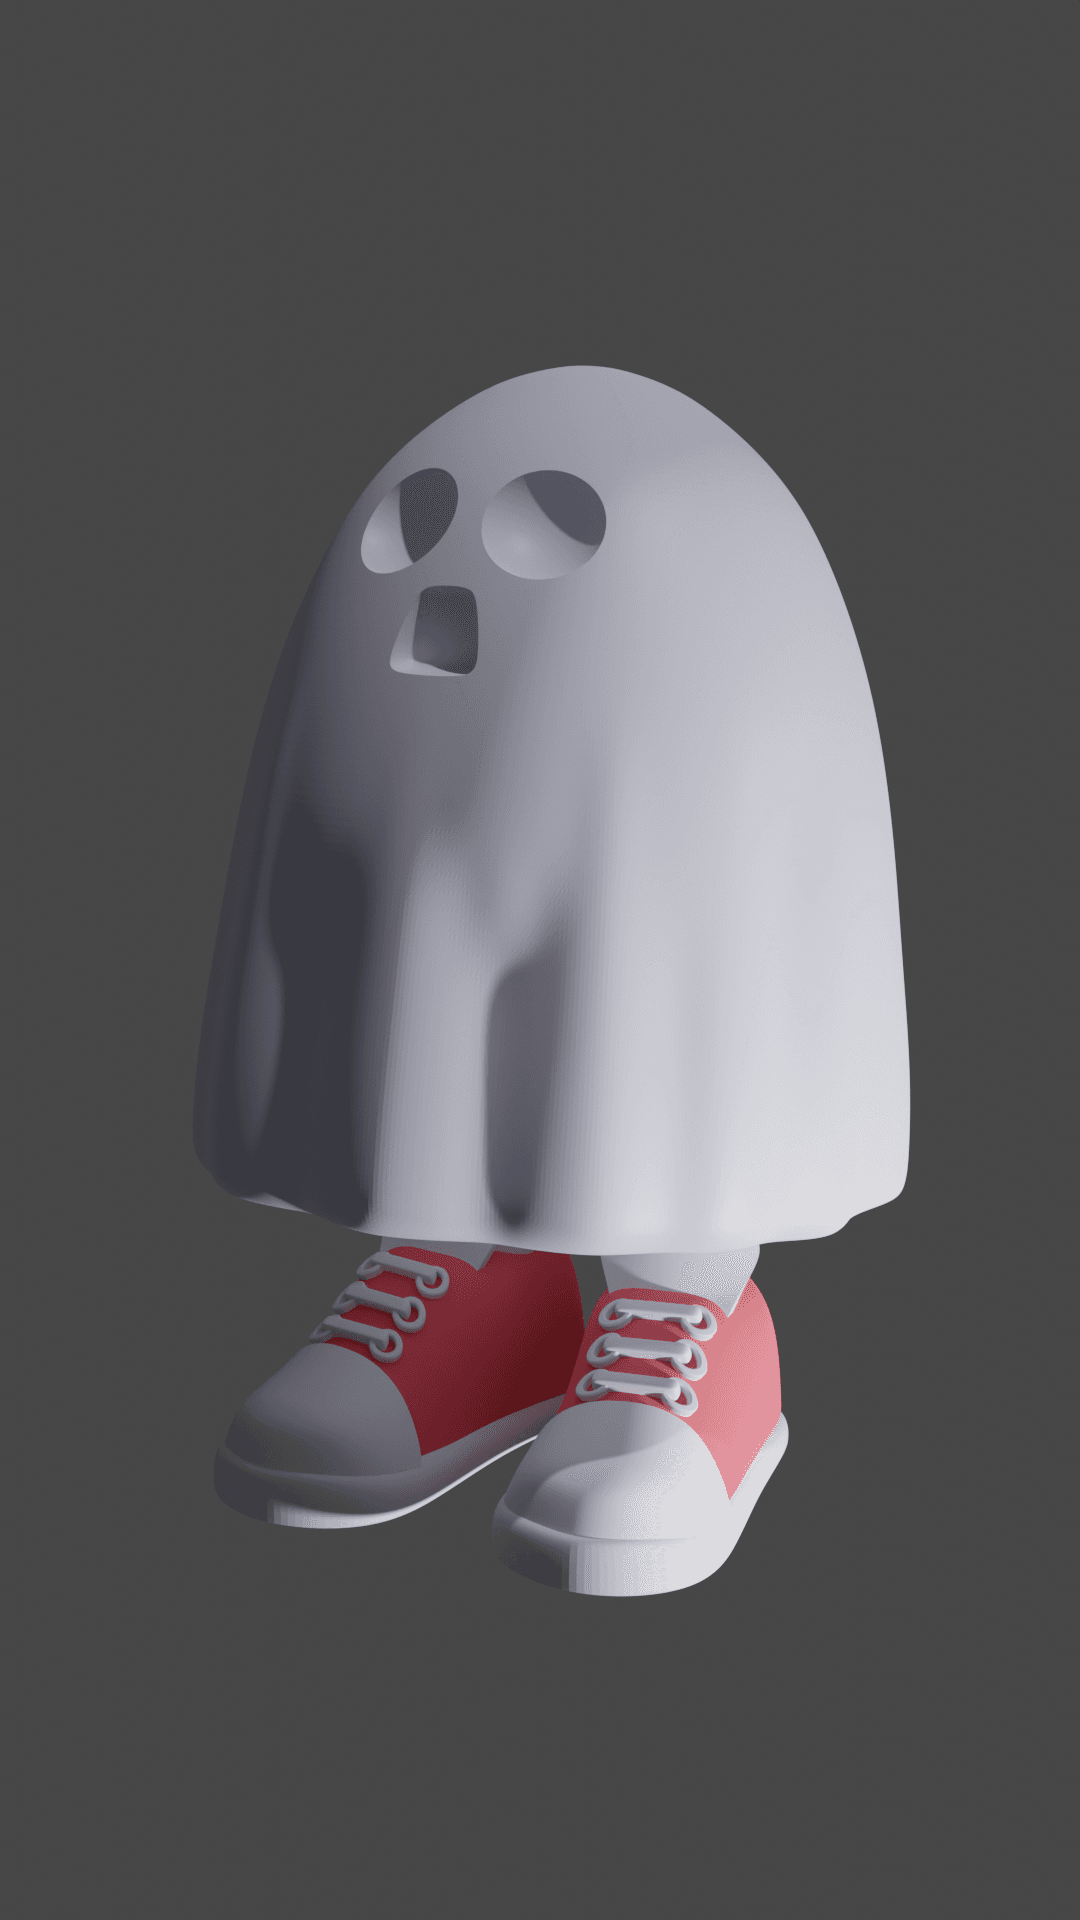 Drippy Among Us - 3D model by nate.armstrong on Thangs